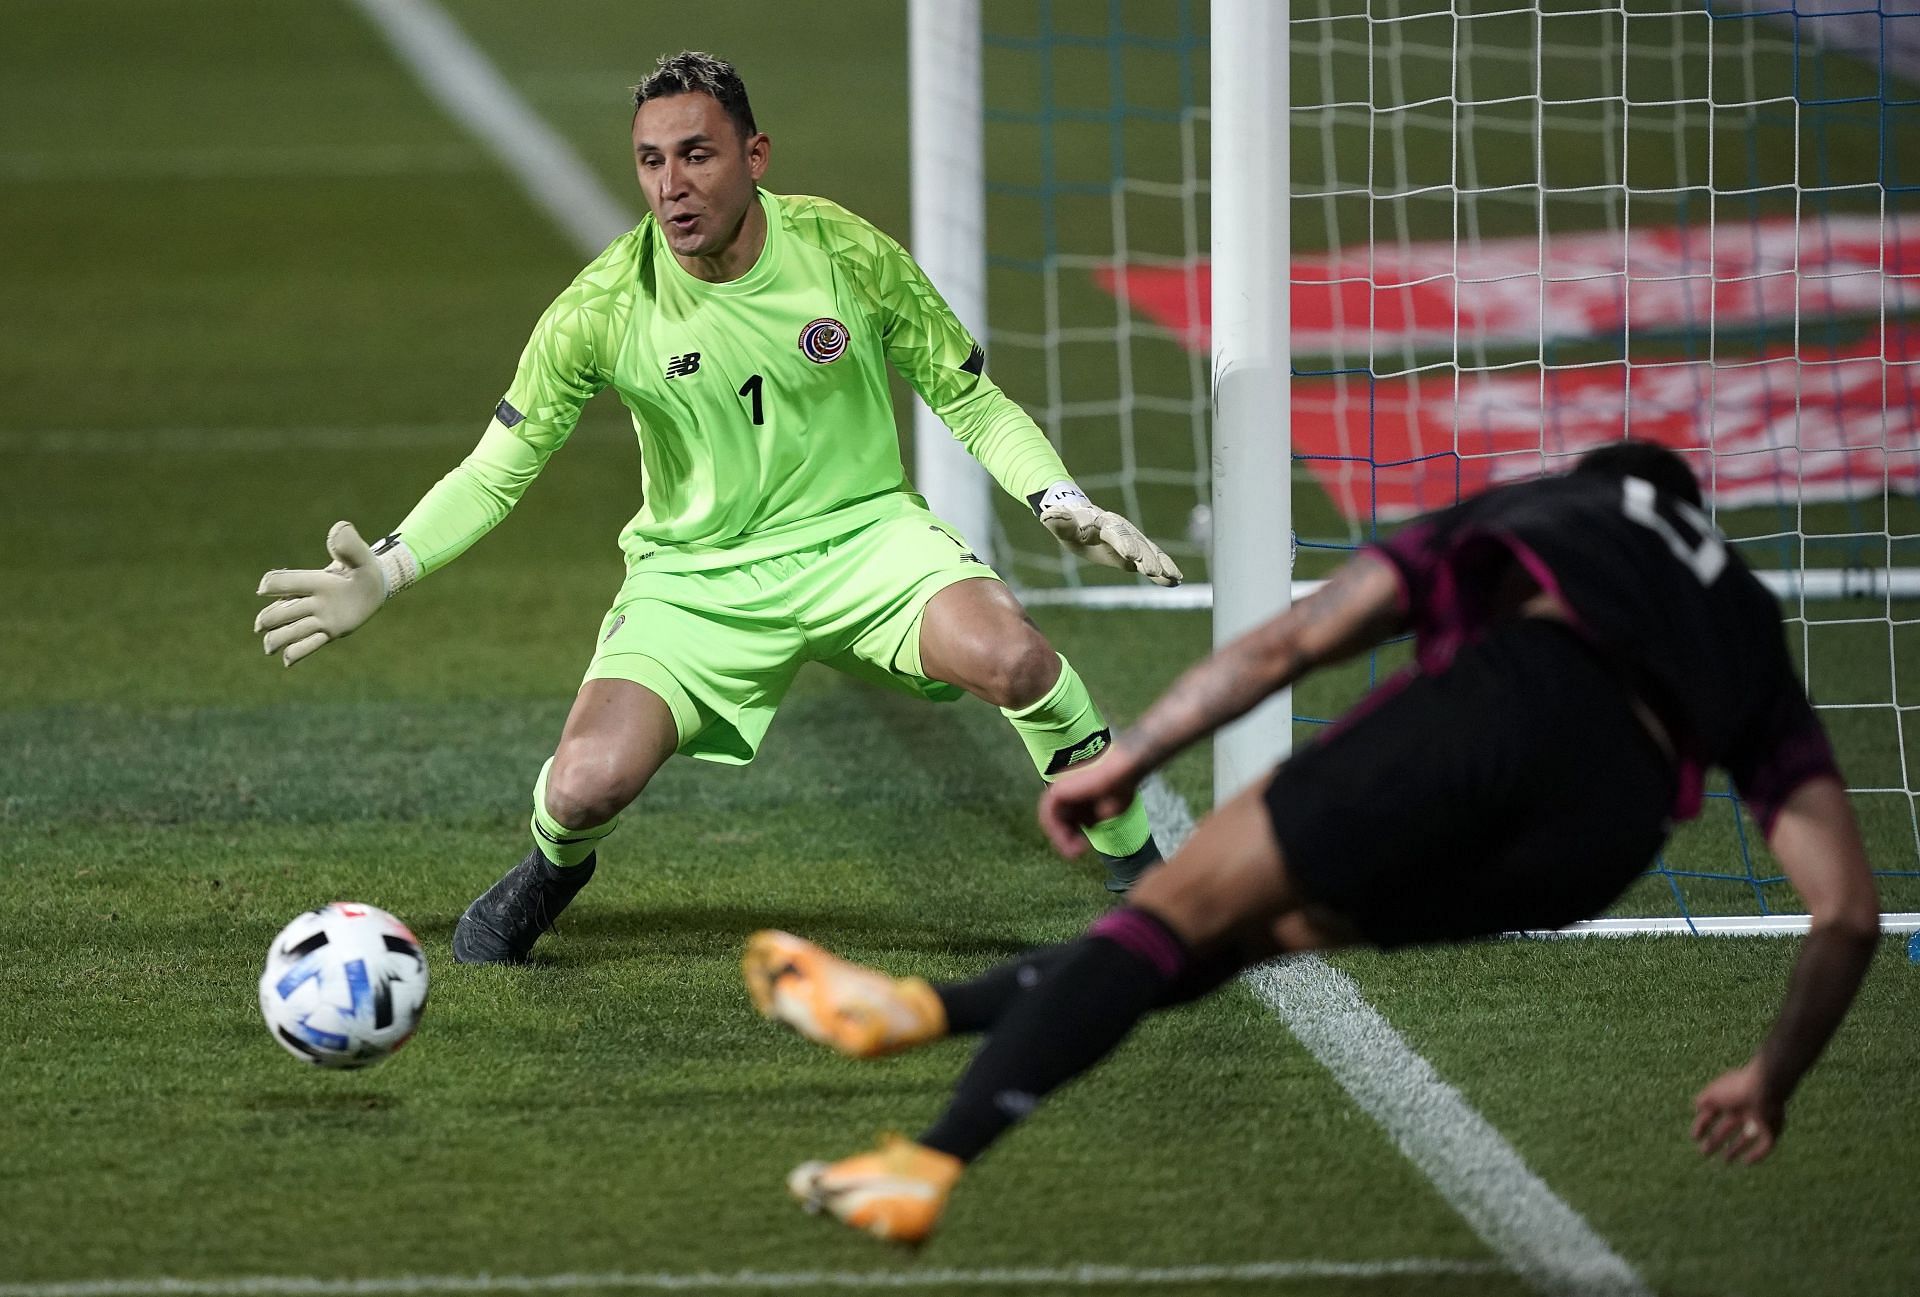 Navas is one of the most reliable goalkeepers in the game.